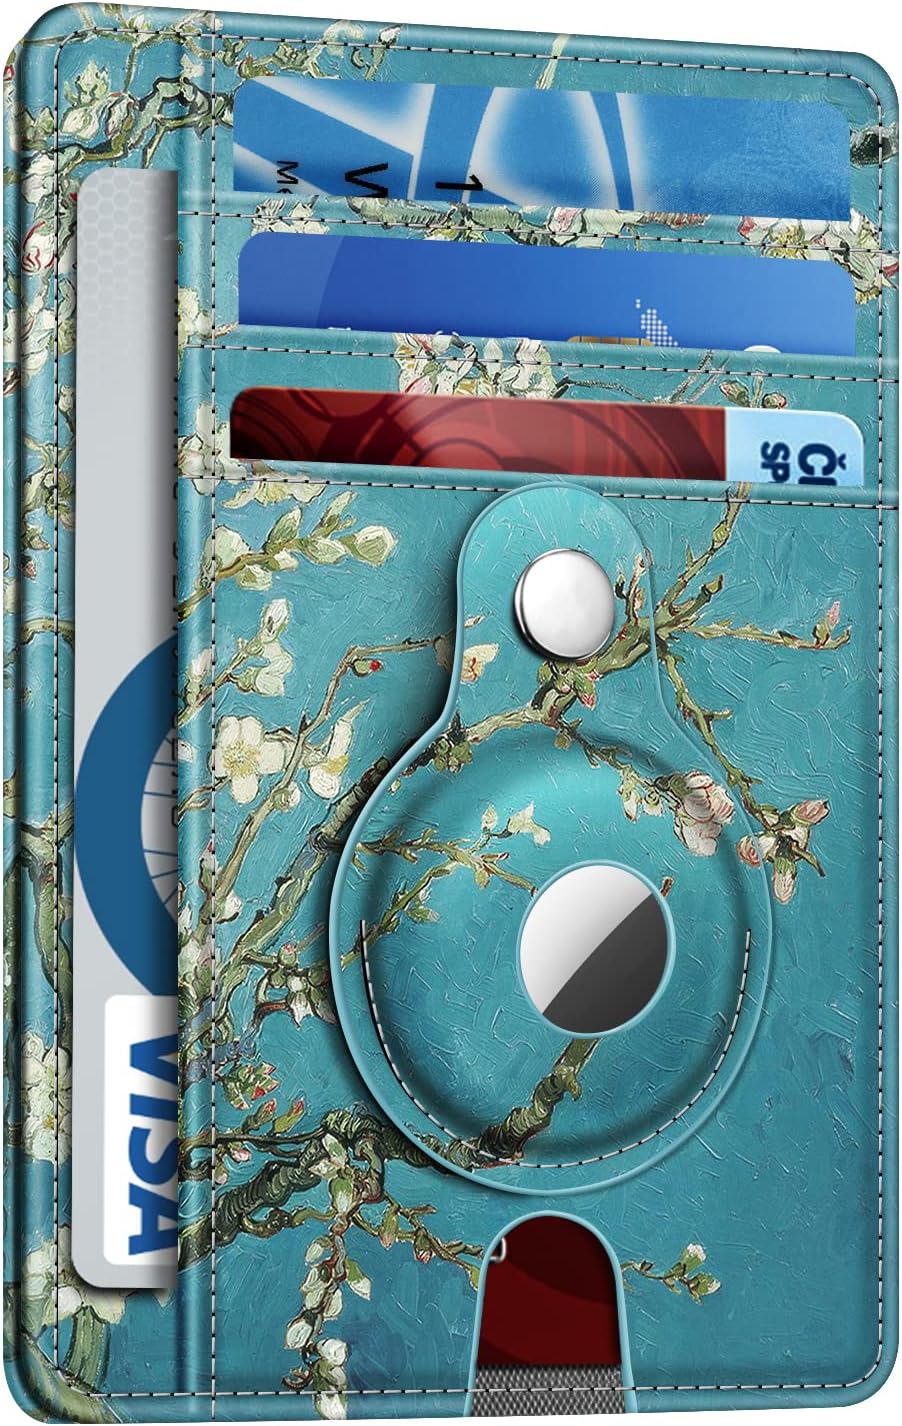 Spring Fashionable Smart Wallet - 7 Cards Slot With ID Windows - Floral Faux Leather